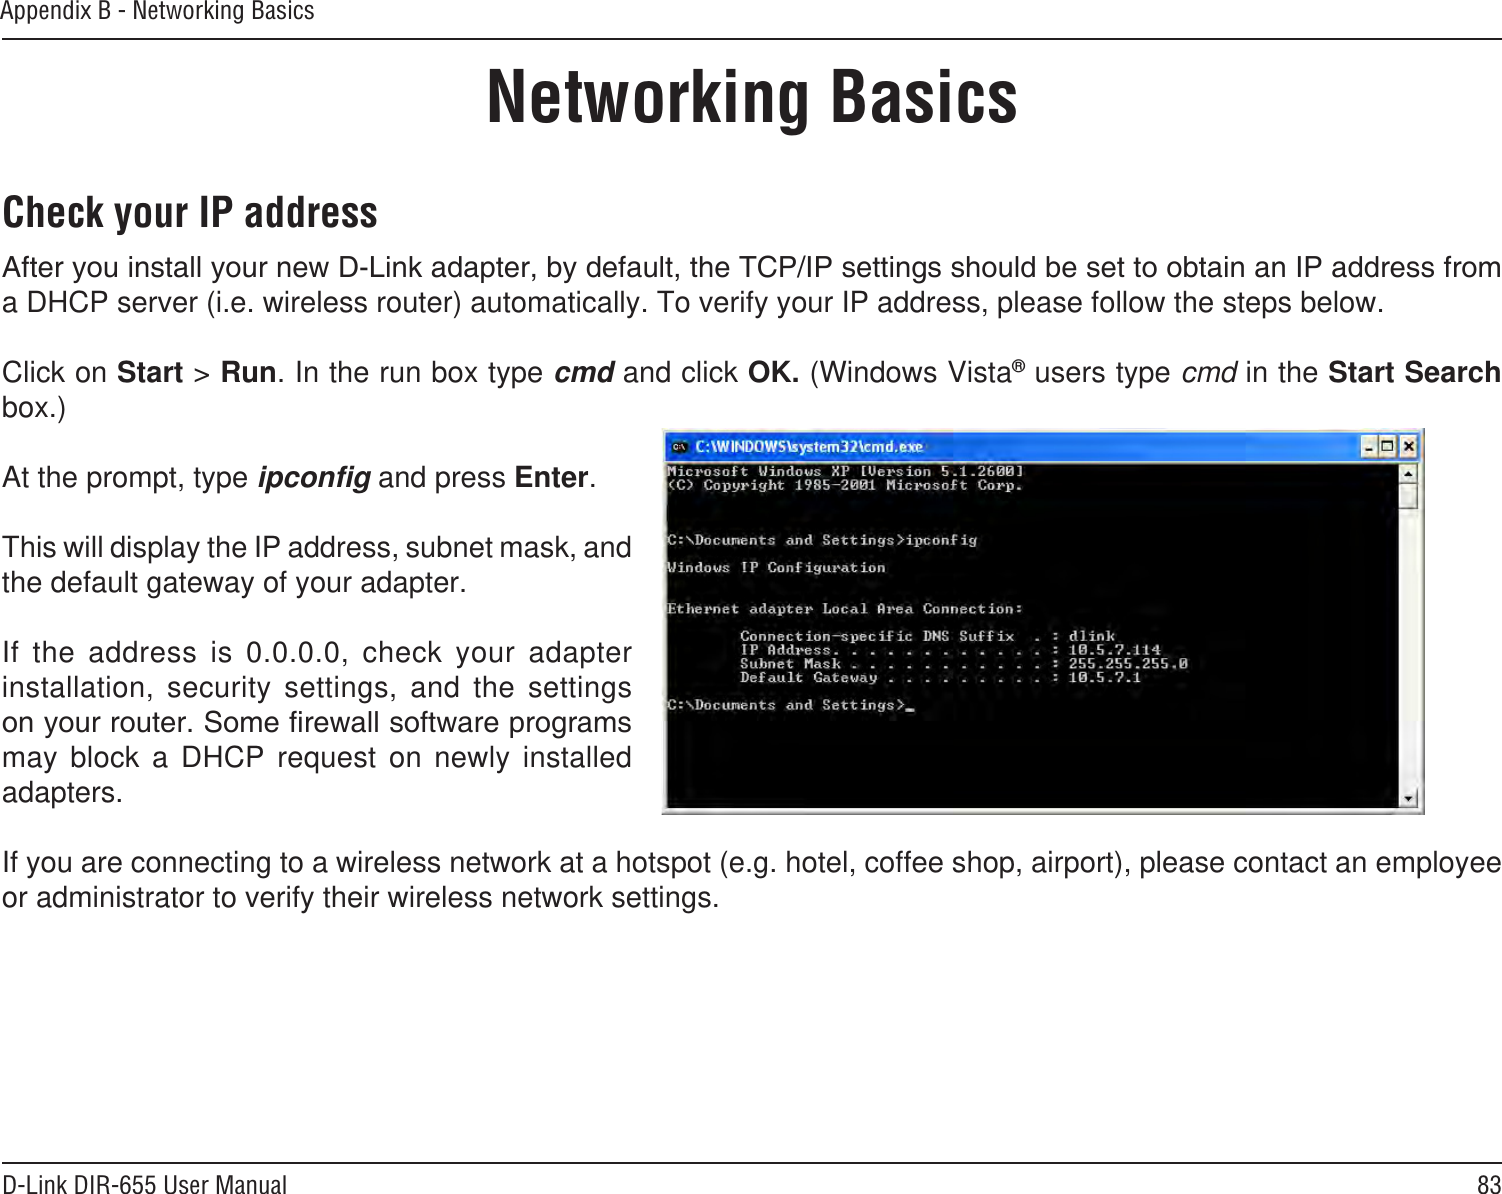 83D-Link DIR-655 User ManualAppendix B - Networking BasicsNetworking BasicsCheck your IP addressa DHCP server (i.e. wireless router) automatically. To verify your IP address, please follow the steps below.Click on Start &gt; Run. In the run box type cmd and click OK. (Windows Vista® users type cmd in the Start Search box.)At the prompt, type ipconﬁg and press Enter.This will display the IP address, subnet mask, and the default gateway of your adapter.If  the  address  is  0.0.0.0,  check  your  adapter installation,  security  settings,  and  the  settings may  block  a  DHCP  request  on  newly  installed adapters. If you are connecting to a wireless network at a hotspot (e.g. hotel, coffee shop, airport), please contact an employee or administrator to verify their wireless network settings.